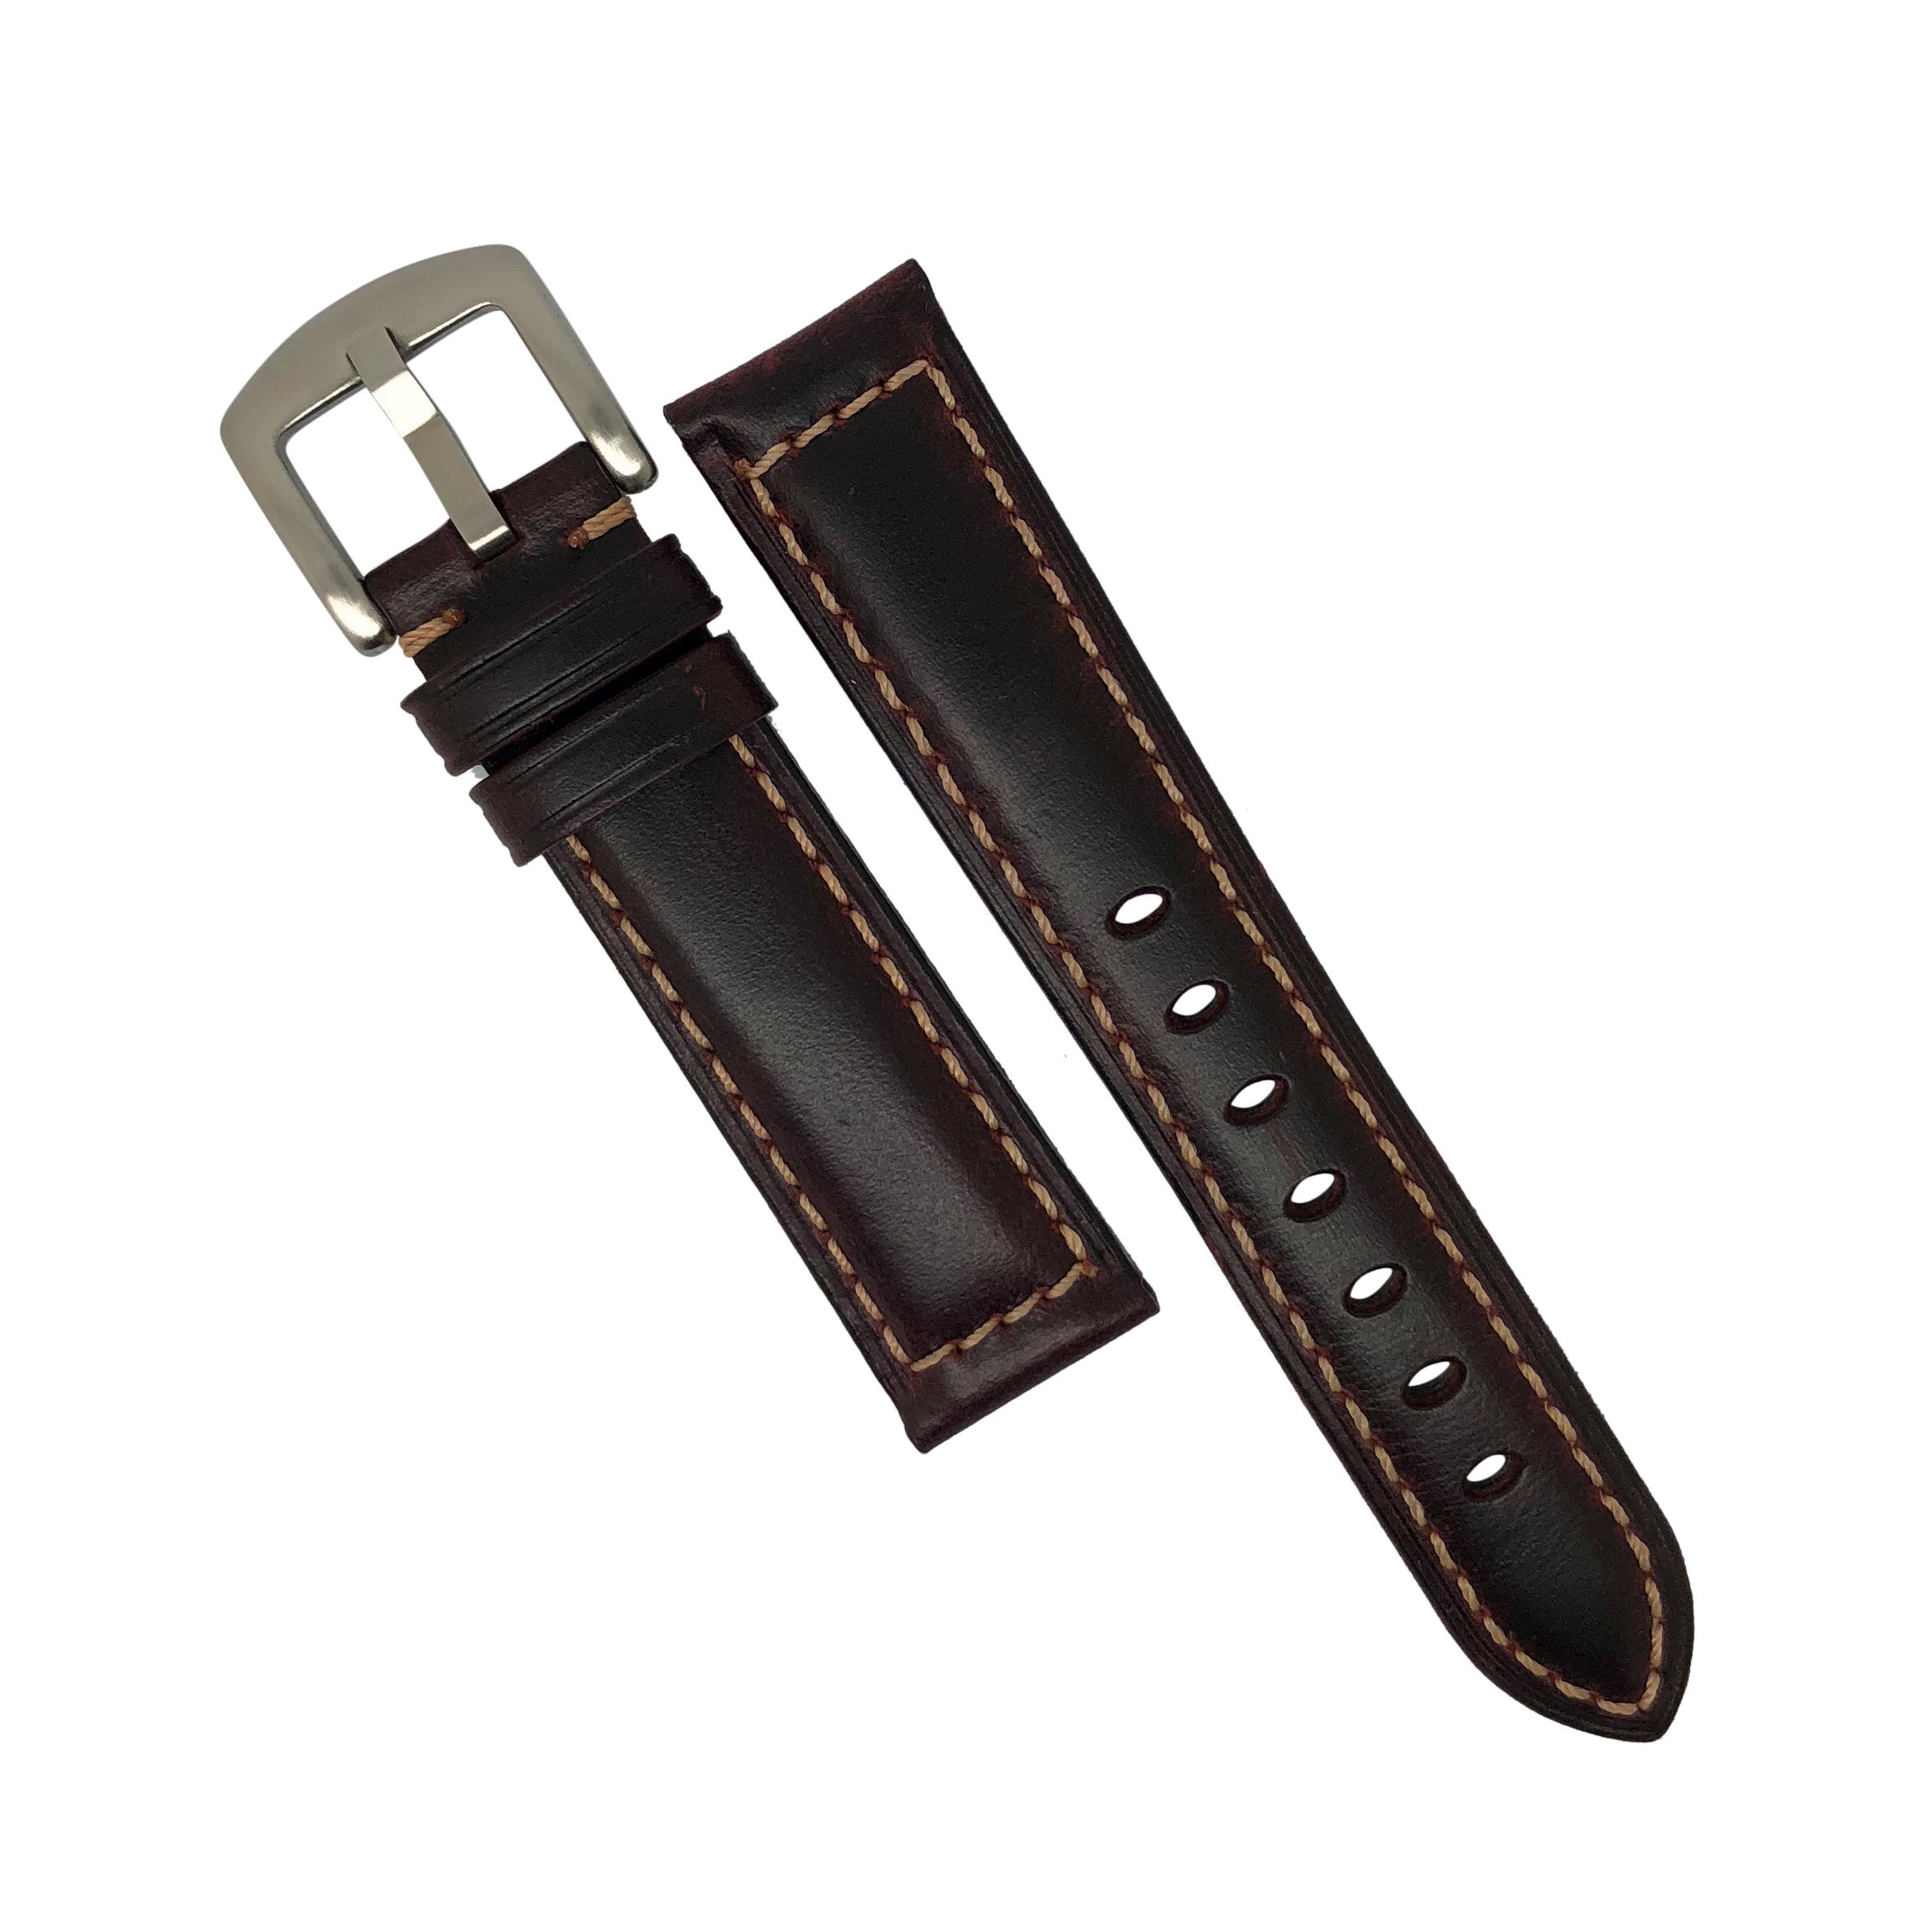 M2 Oil Waxed Leather Watch Strap in Maroon (20mm) - Nomad watch Works